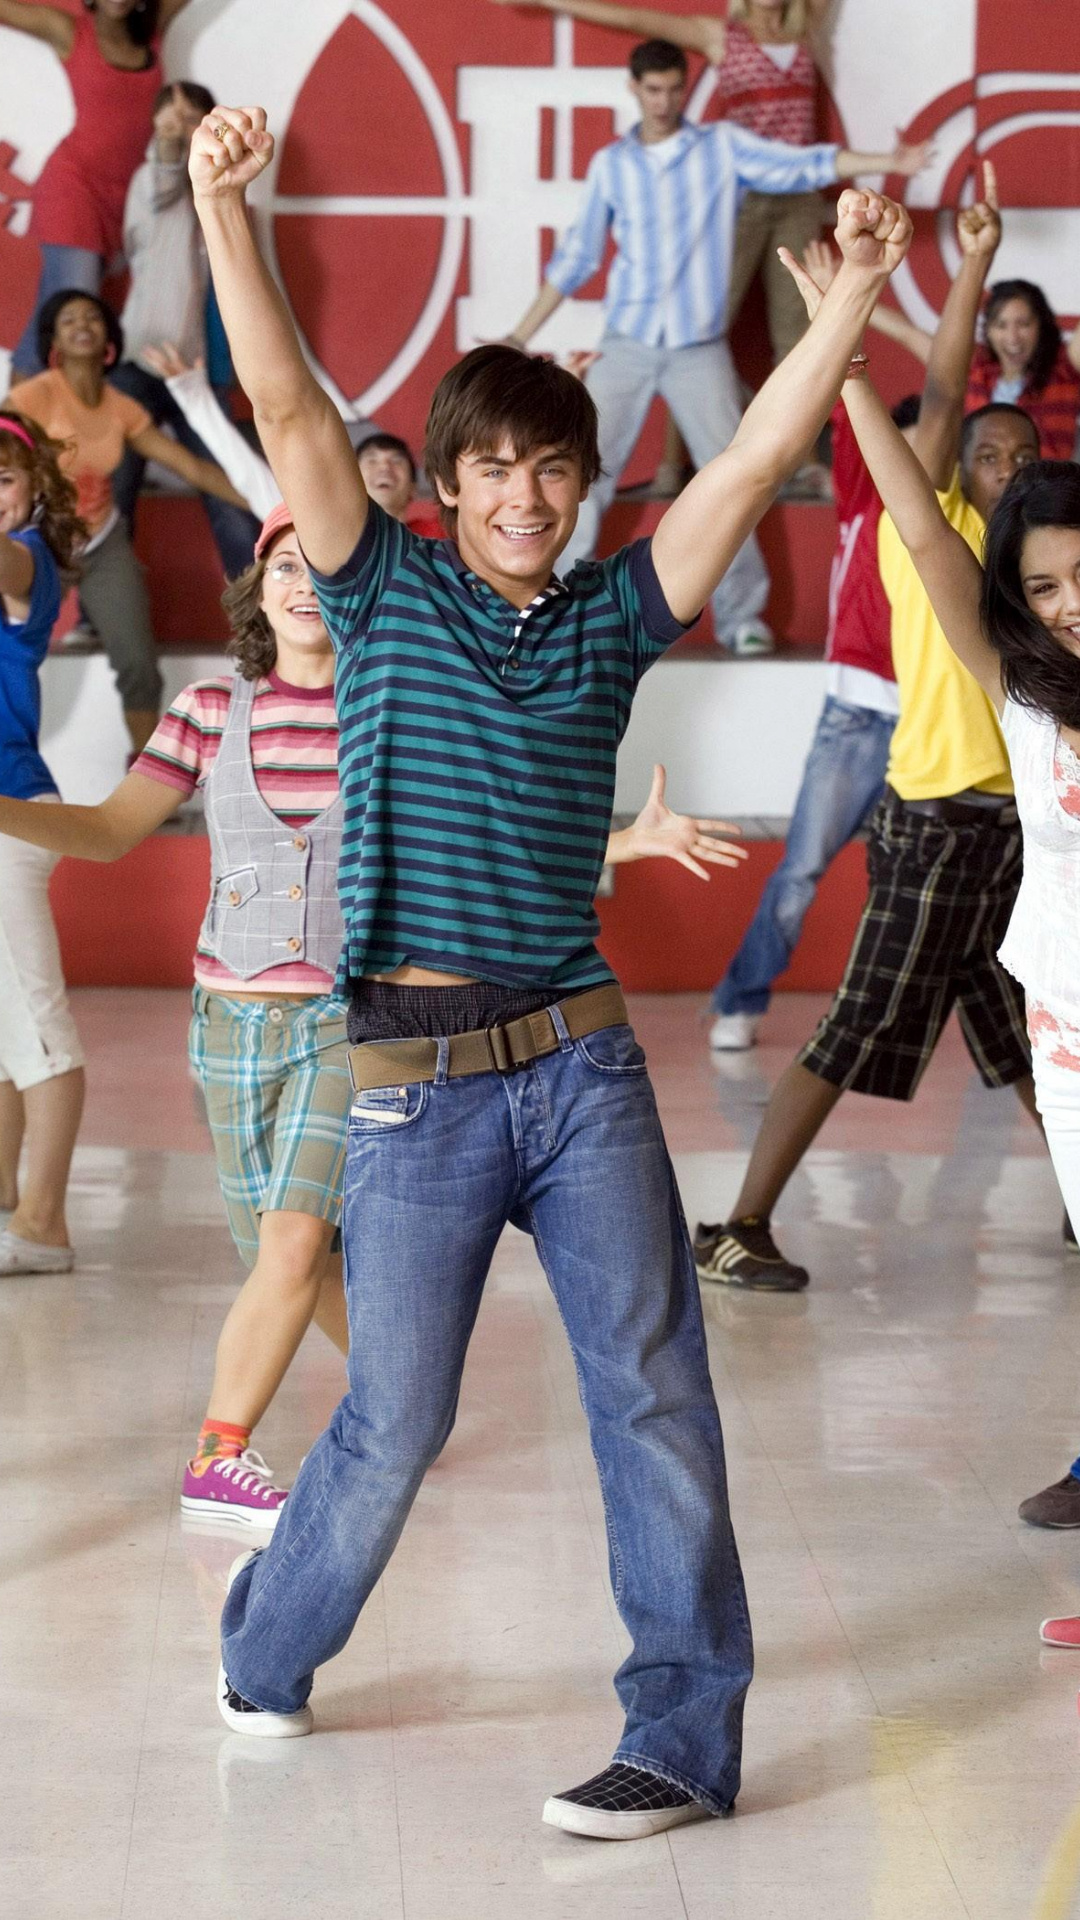 Musical: High School Musical, Zac Efron as Troy Bolton, The 63rd Disney Channel Original Movie. 1080x1920 Full HD Wallpaper.